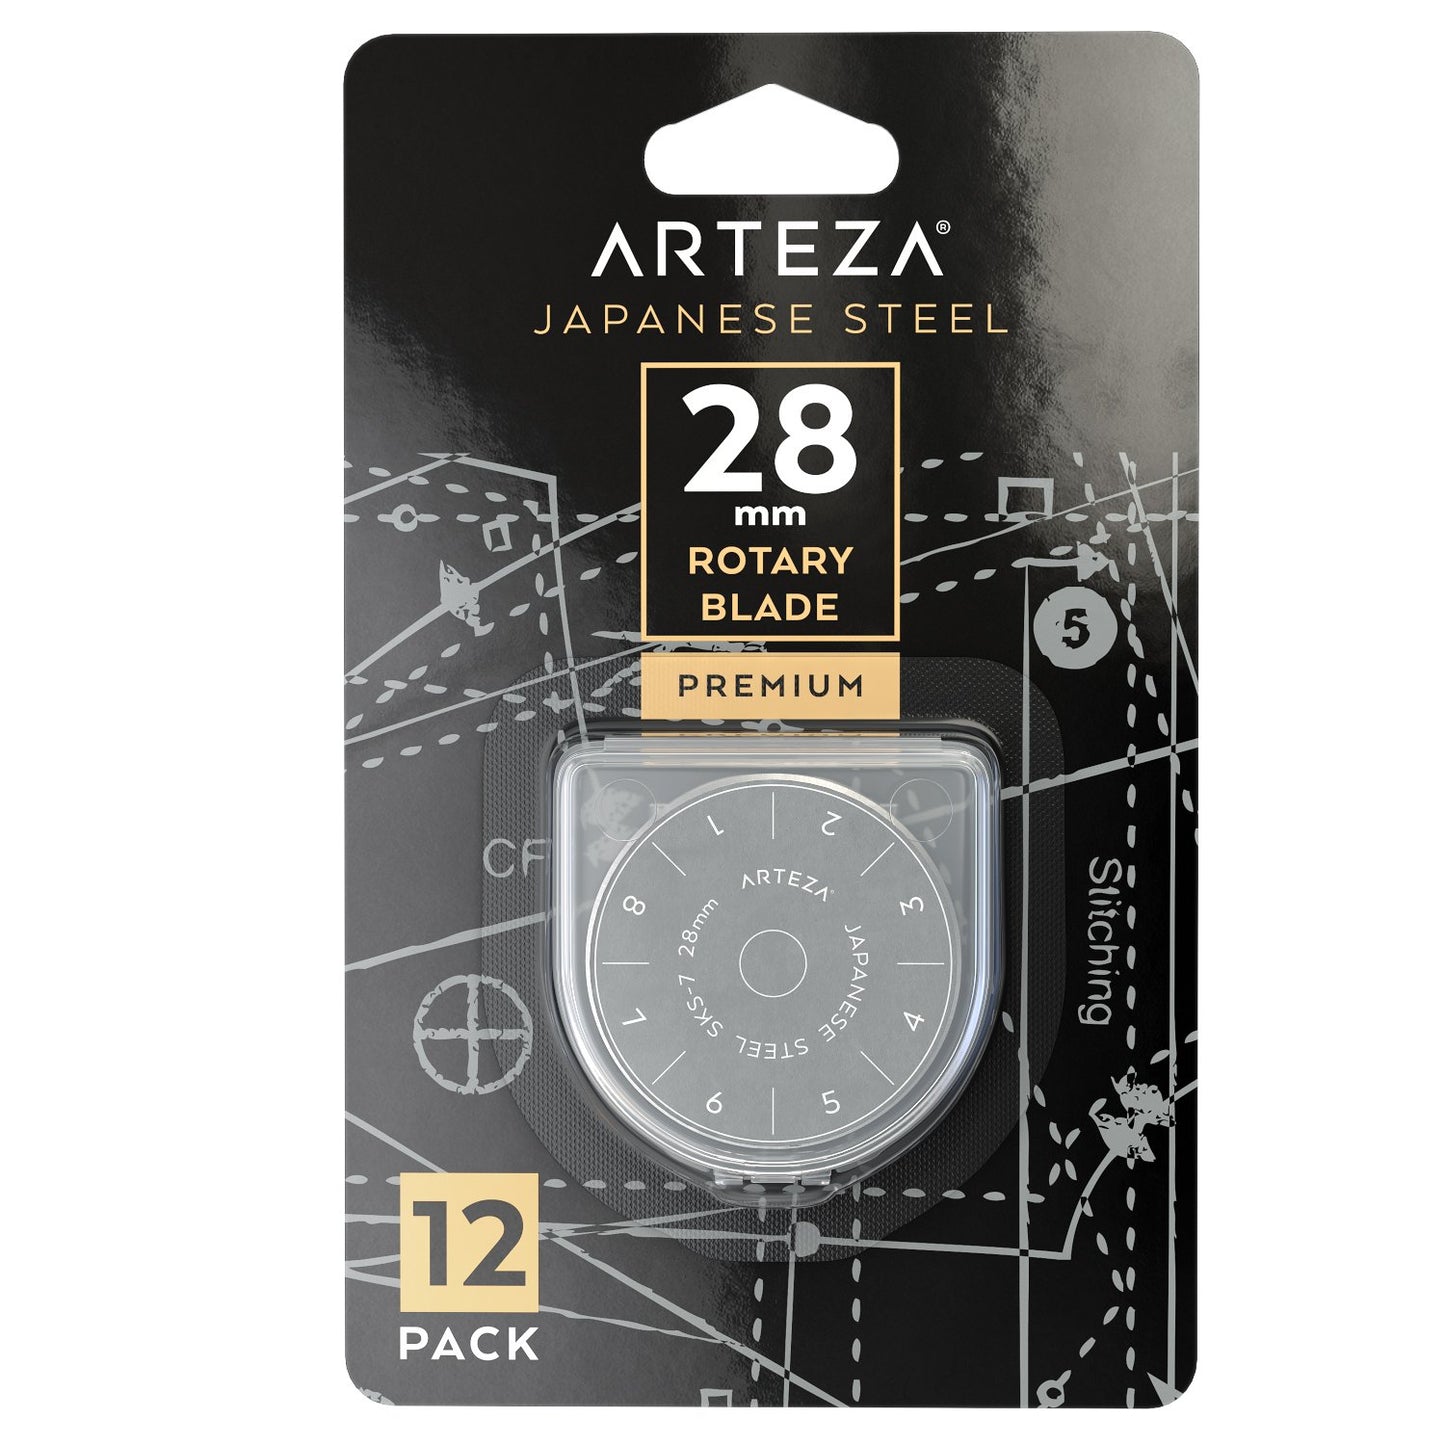 Arteza Rotary Cutter Blades, 28mm - Pack of 12